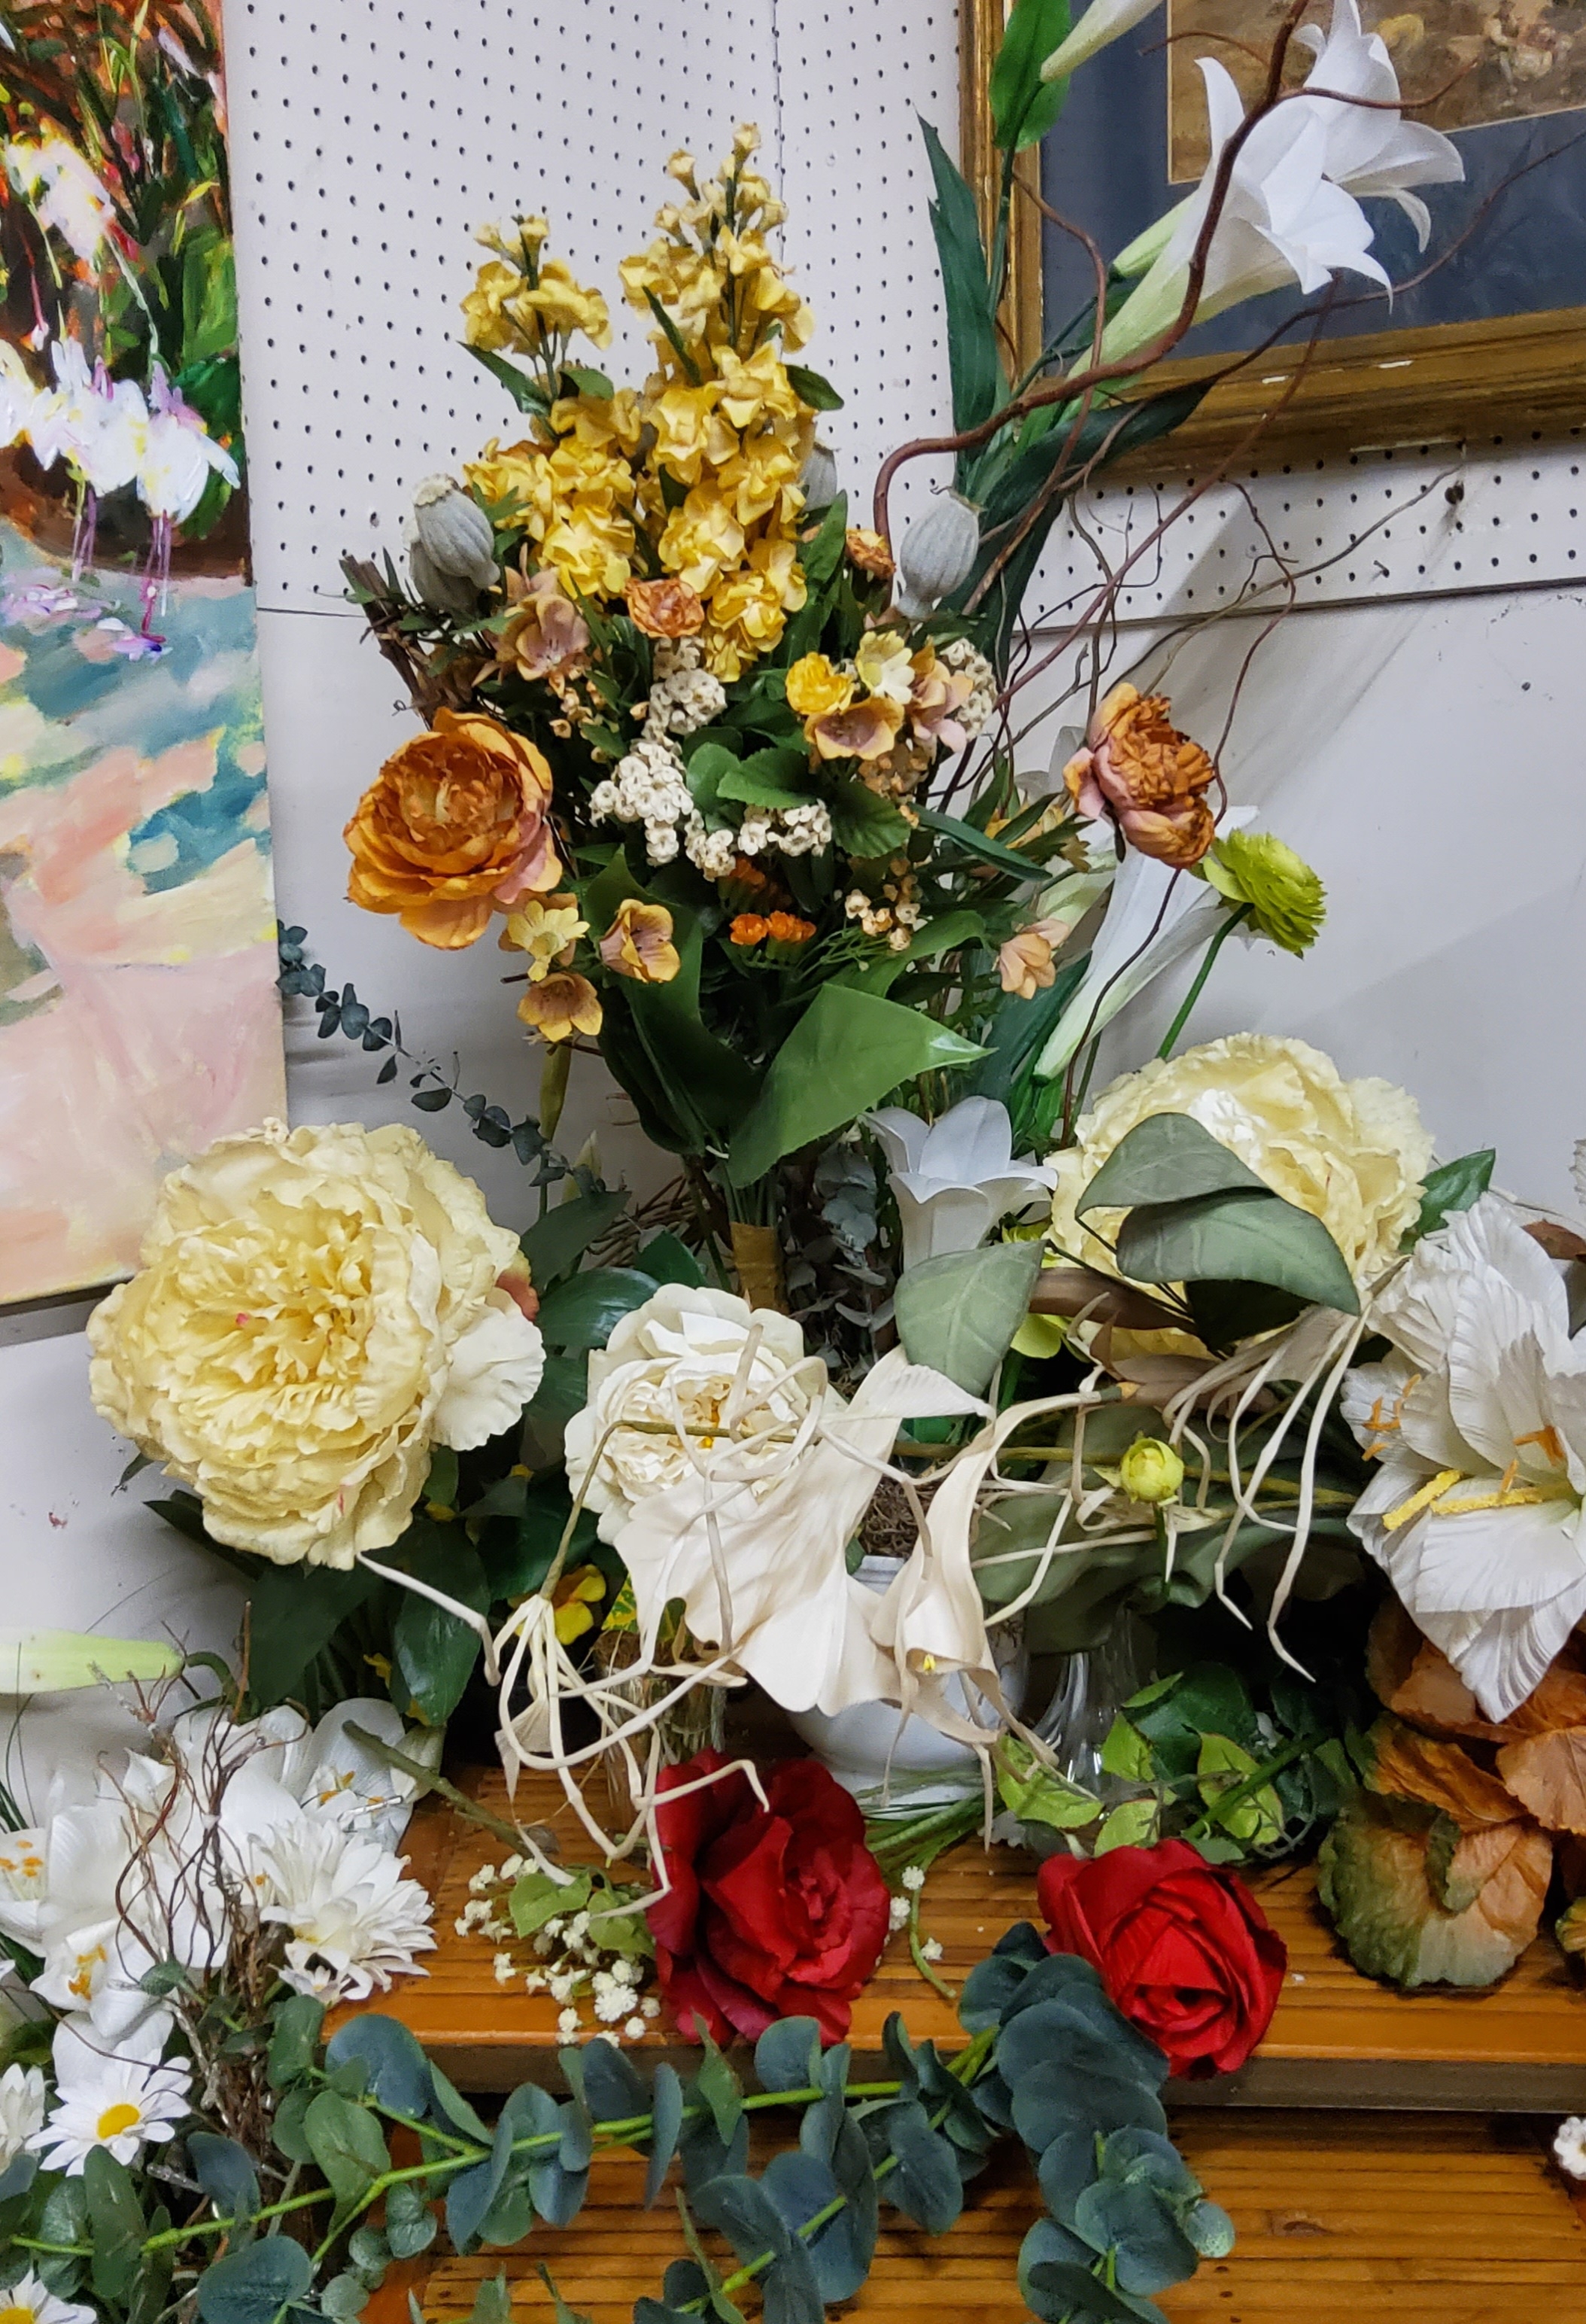 Image shows part of the lot - various high quality artificial flowers